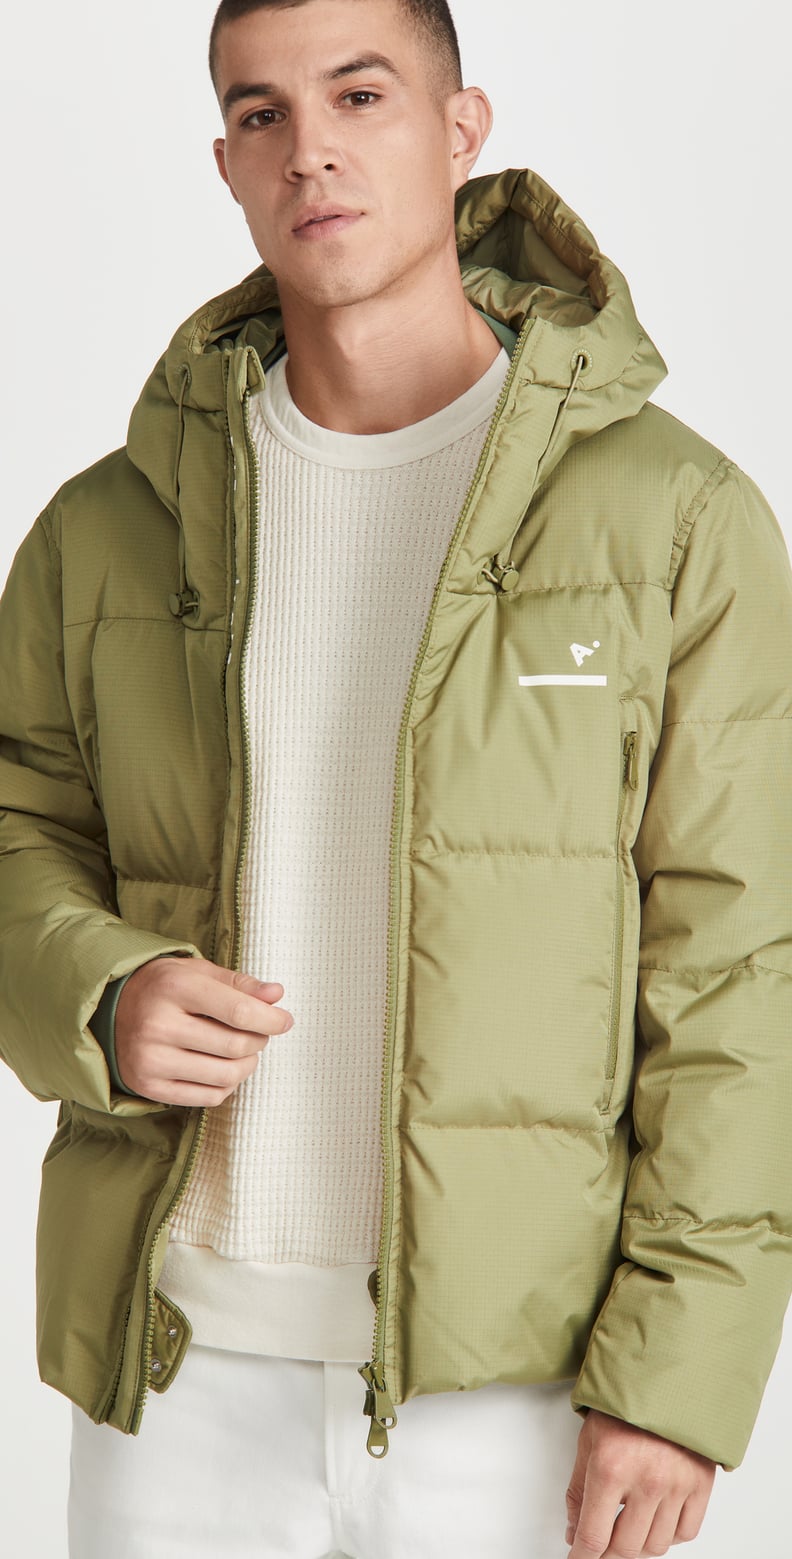 A Winter Must Have: The Arrivals AER Classic Puffer Jacket